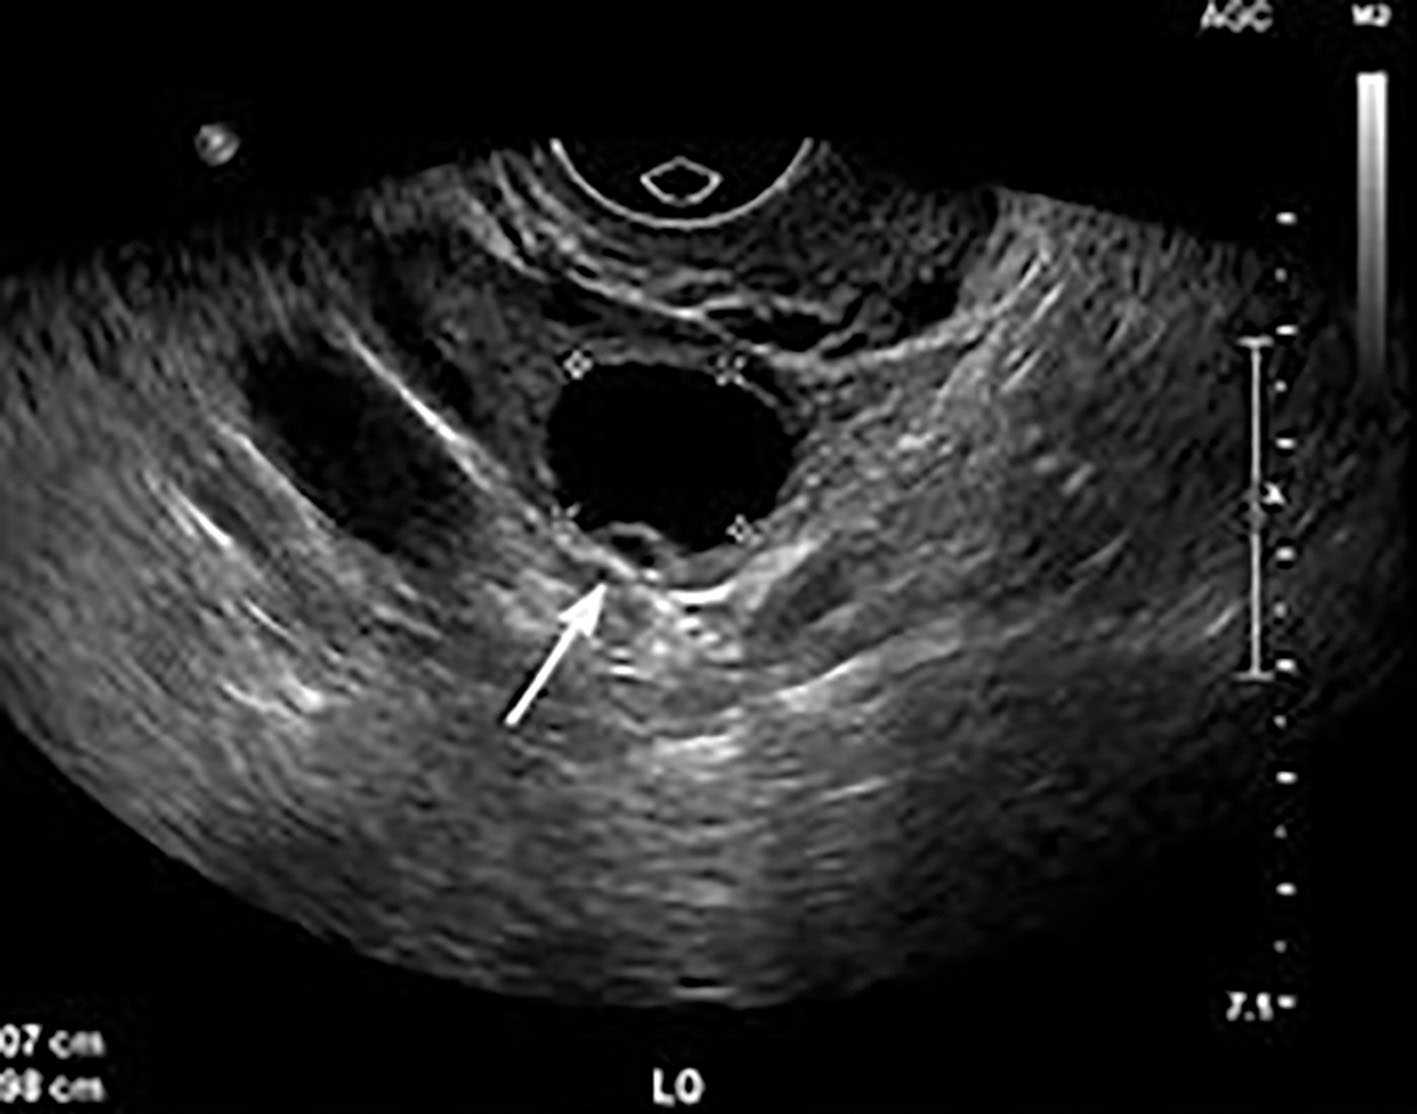 Fig. 44.7, The majority of ovarian masses are simple cysts, most of which are benign. Sonographic criteria for a simple cyst include a thin, smooth wall, anechoic contents, and acoustic enhancement.